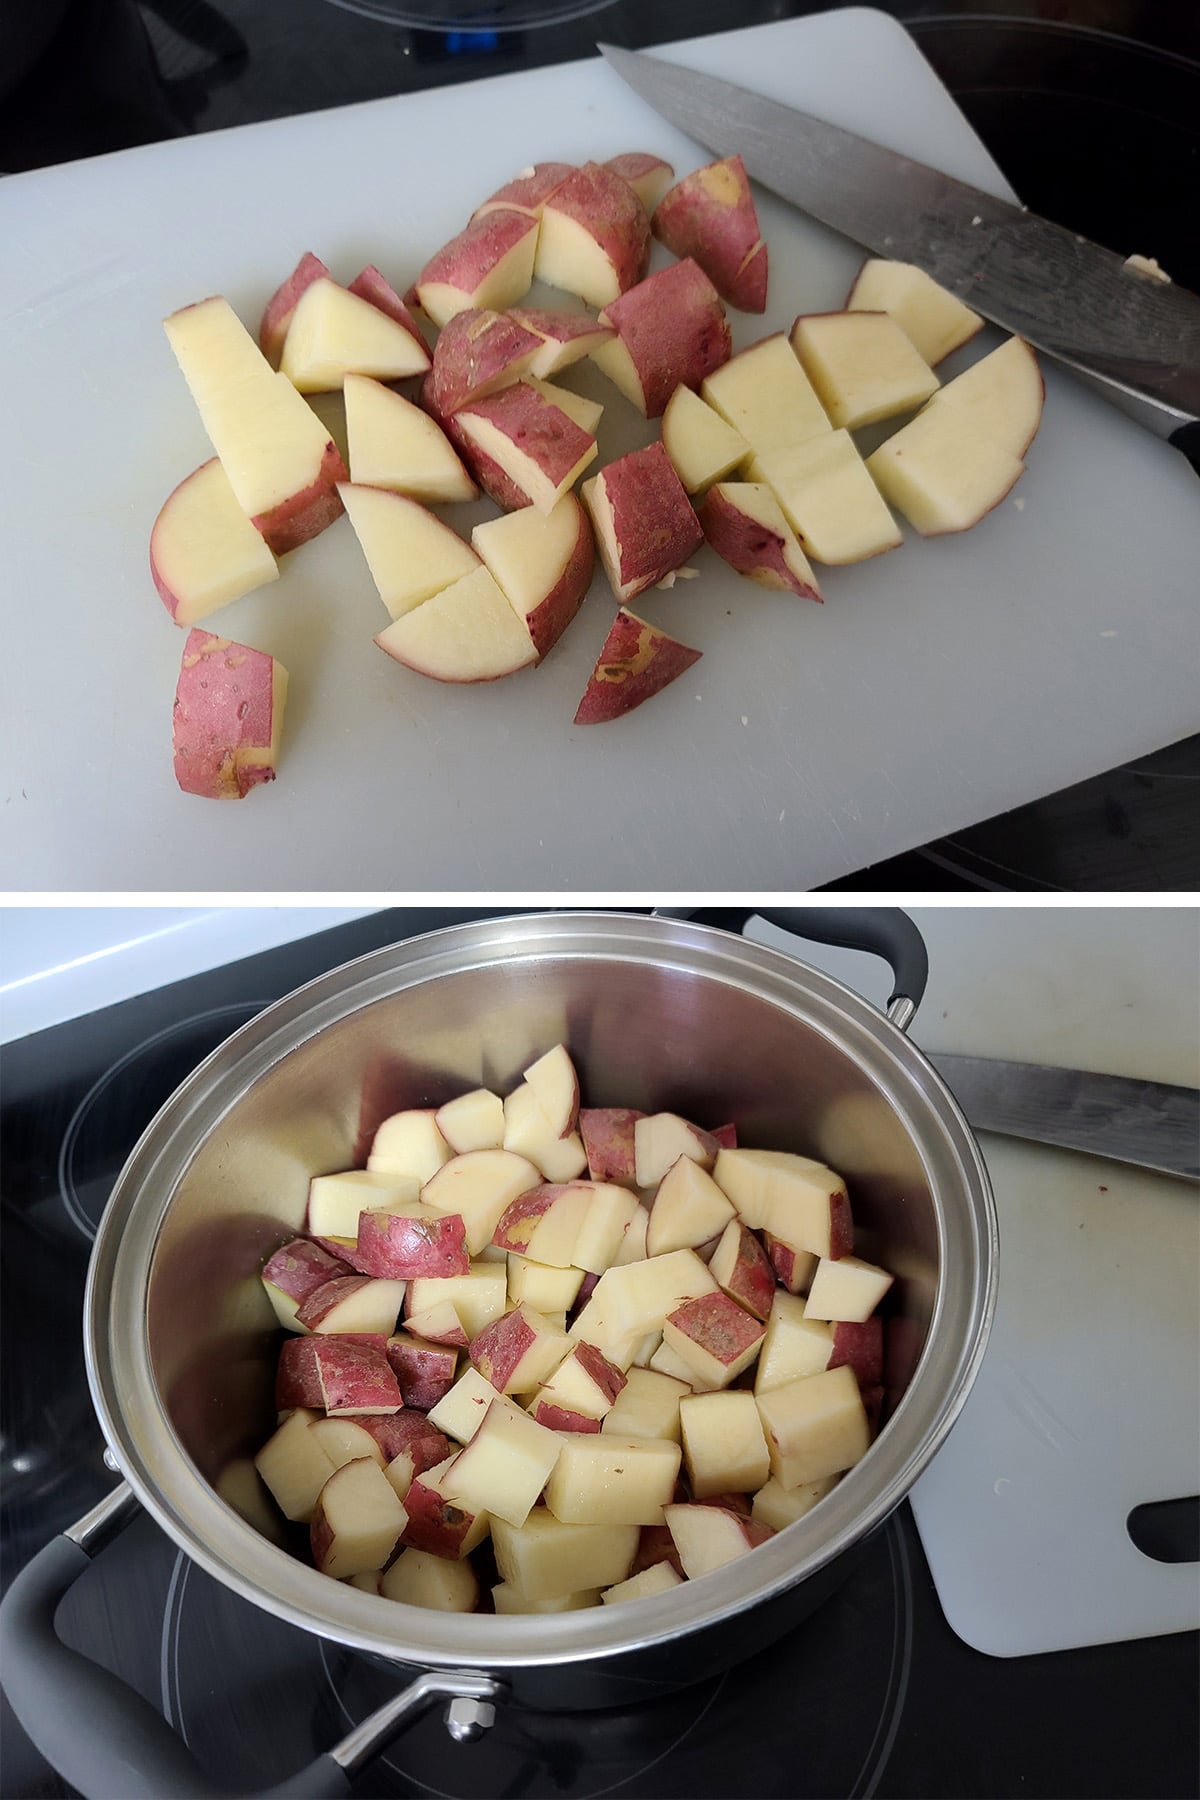 Red potatoes being chopped and added to a pot.